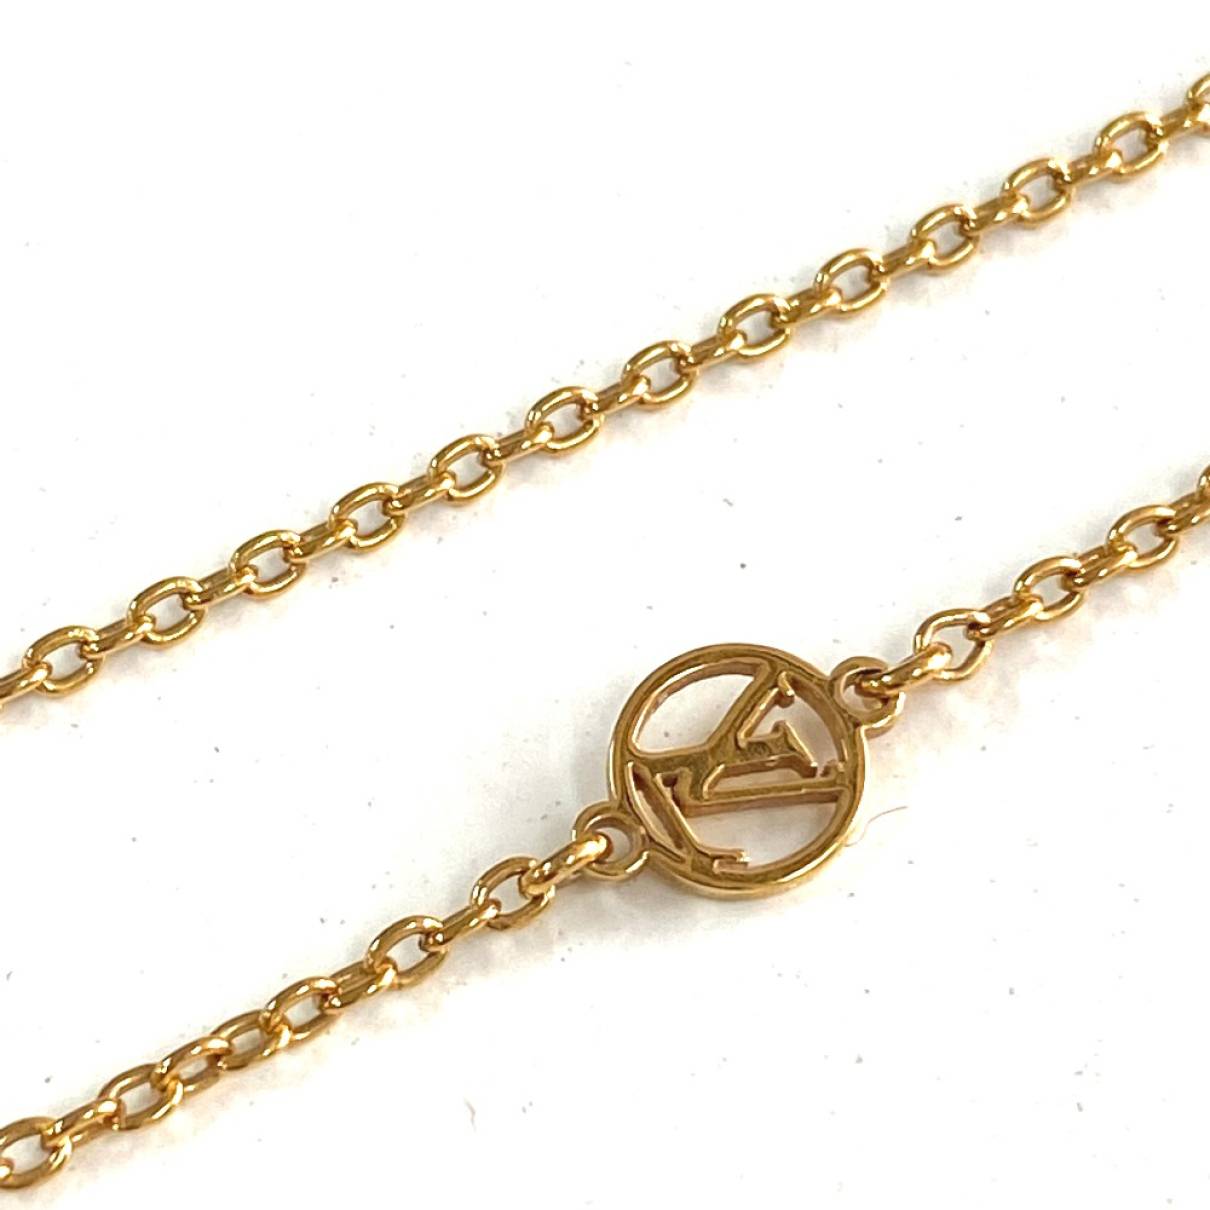 Louis Vuitton Necklace Essential V Pendant Gold Metal *Pre-owned